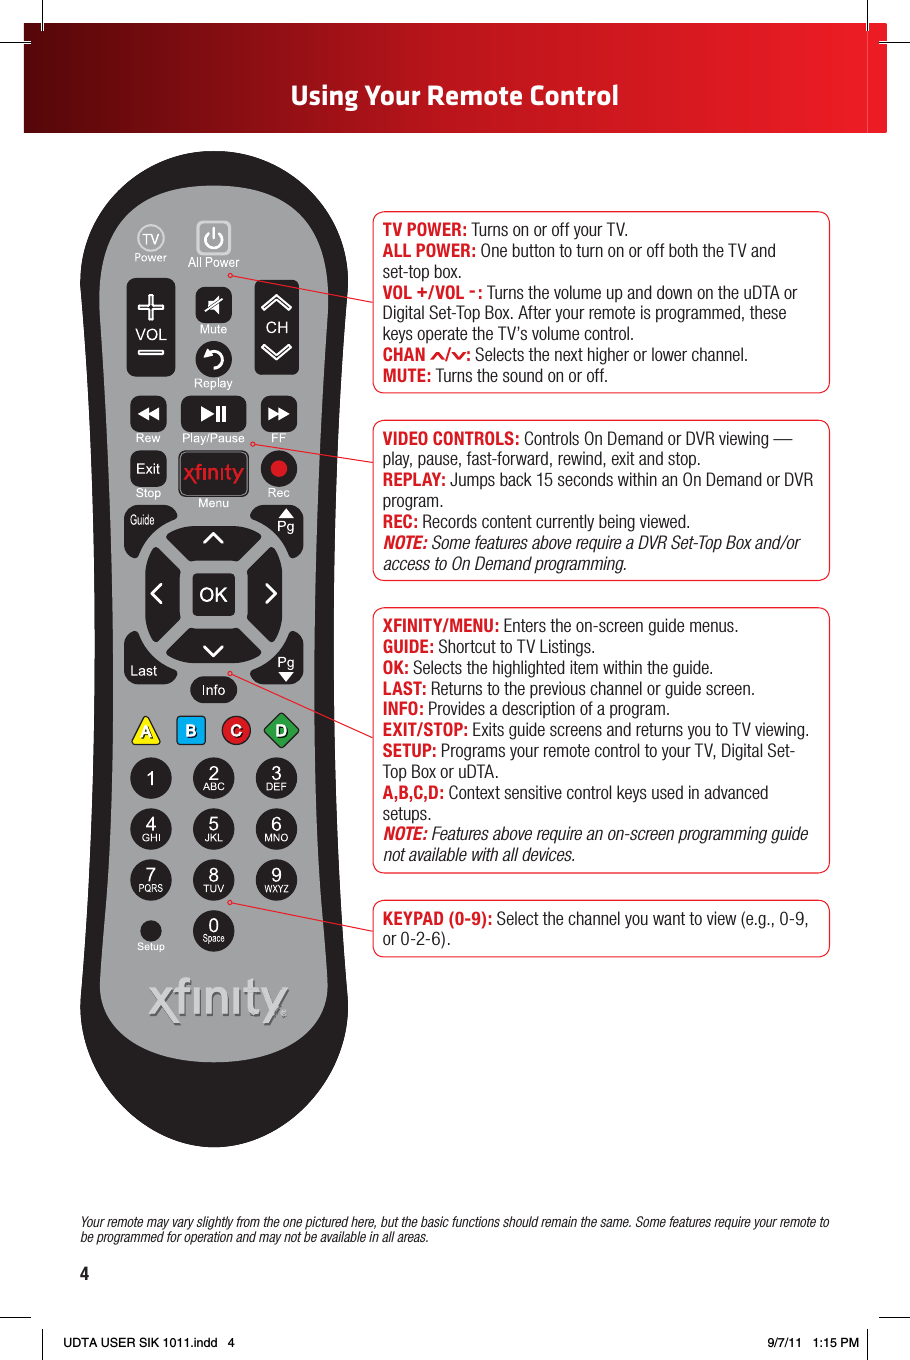 4Using Your Remote ControlYour remote may vary slightly from the one pictured here, but the basic functions should remain the same. Some features require your remote to be programmed for operation and may not be available in all areas.  TV POWER: Turns on or off your TV.ALL POWER: One button to turn on or off both the TV and set‑top box.VOL +/VOL - : Turns the volume up and down on the uDTA or Digital Set‑Top Box. After your remote is programmed, these keys operate the TV’s volume control.CHAN  / : Selects the next higher or lower channel.MUTE: Turns the sound on or off. VIDEO CONTROLS: Controls On Demand or DVR viewing — play, pause, fast‑forward, rewind, exit and stop.REPLAY: Jumps back 15 seconds within an On Demand or DVR program.REC: Records content currently being viewed.NOTE: Some features above require a DVR Set-Top Box and/or access to On Demand programming.XFINITY/MENU: Enters the on‑screen guide menus.GUIDE: Shortcut to TV Listings.OK: Selects the highlighted item within the guide.LAST: Returns to the previous channel or guide screen.INFO: Provides a description of a program.EXIT/STOP: Exits guide screens and returns you to TV viewing.SETUP: Programs your remote control to your TV, Digital Set‑Top Box or uDTA.A,B,C,D: Context sensitive control keys used in advanced setups.NOTE: Features above require an on-screen programming guide not available with all devices.KEYPAD (0-9): Select the channel you want to view (e.g., 0‑9, or 0‑2‑6).UDTA USER SIK 1011.indd   4 9/7/11   1:15 PM